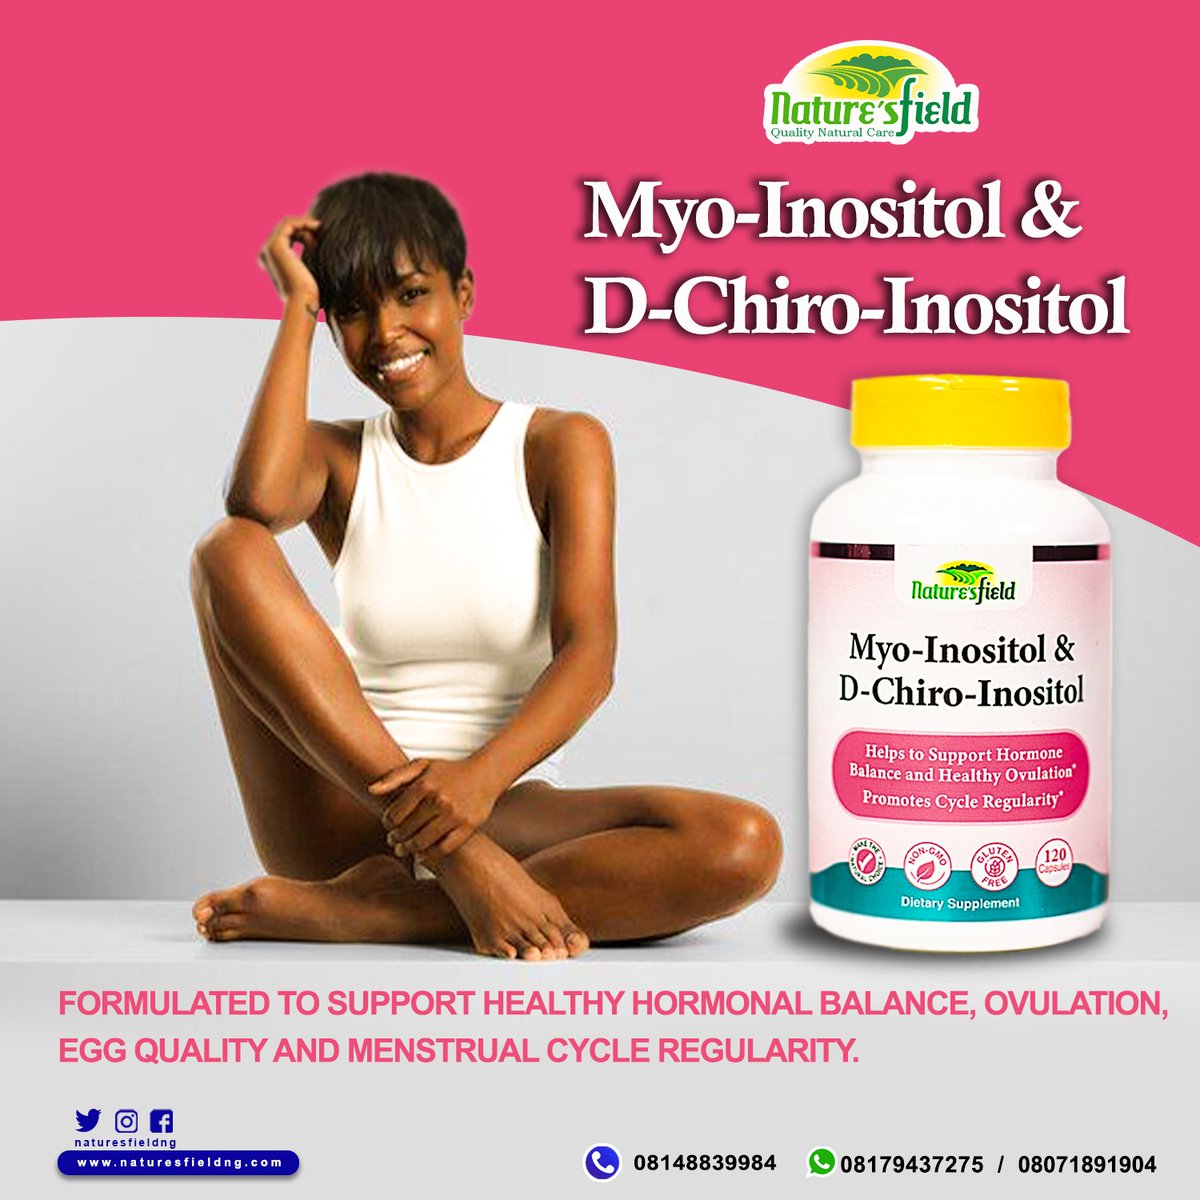 Alleviate PCOS symptoms with this super combination of MYO INOSITOL & D-CHIRO INOSITOL.
Formulated to support healthy hormonal balance, ovulation, egg quality & menstrual cycle irregularity
Available in pharmacies nationwide or you can visit naturesfieldng.com to order yours